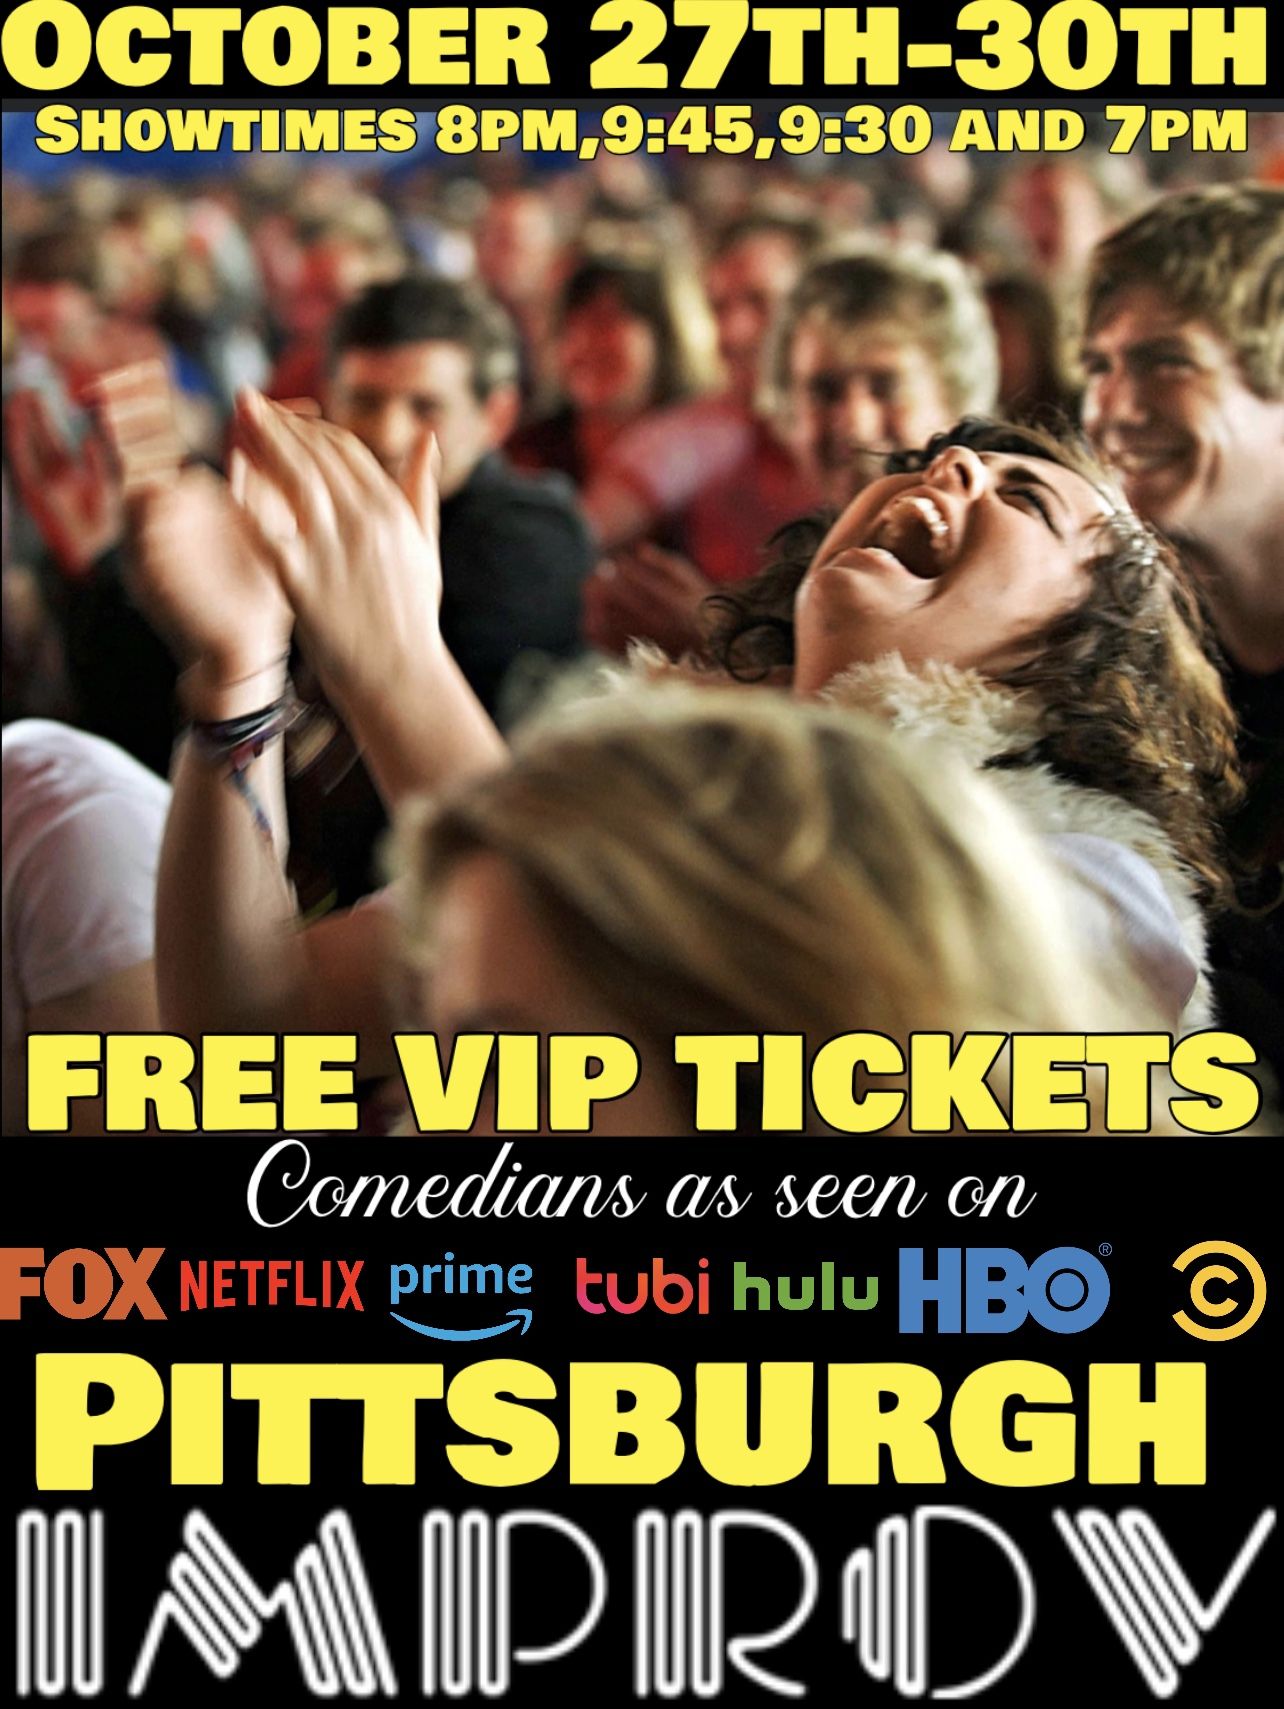 FREE VIP TICKETS TO THE PITTSBURGH IMPROV